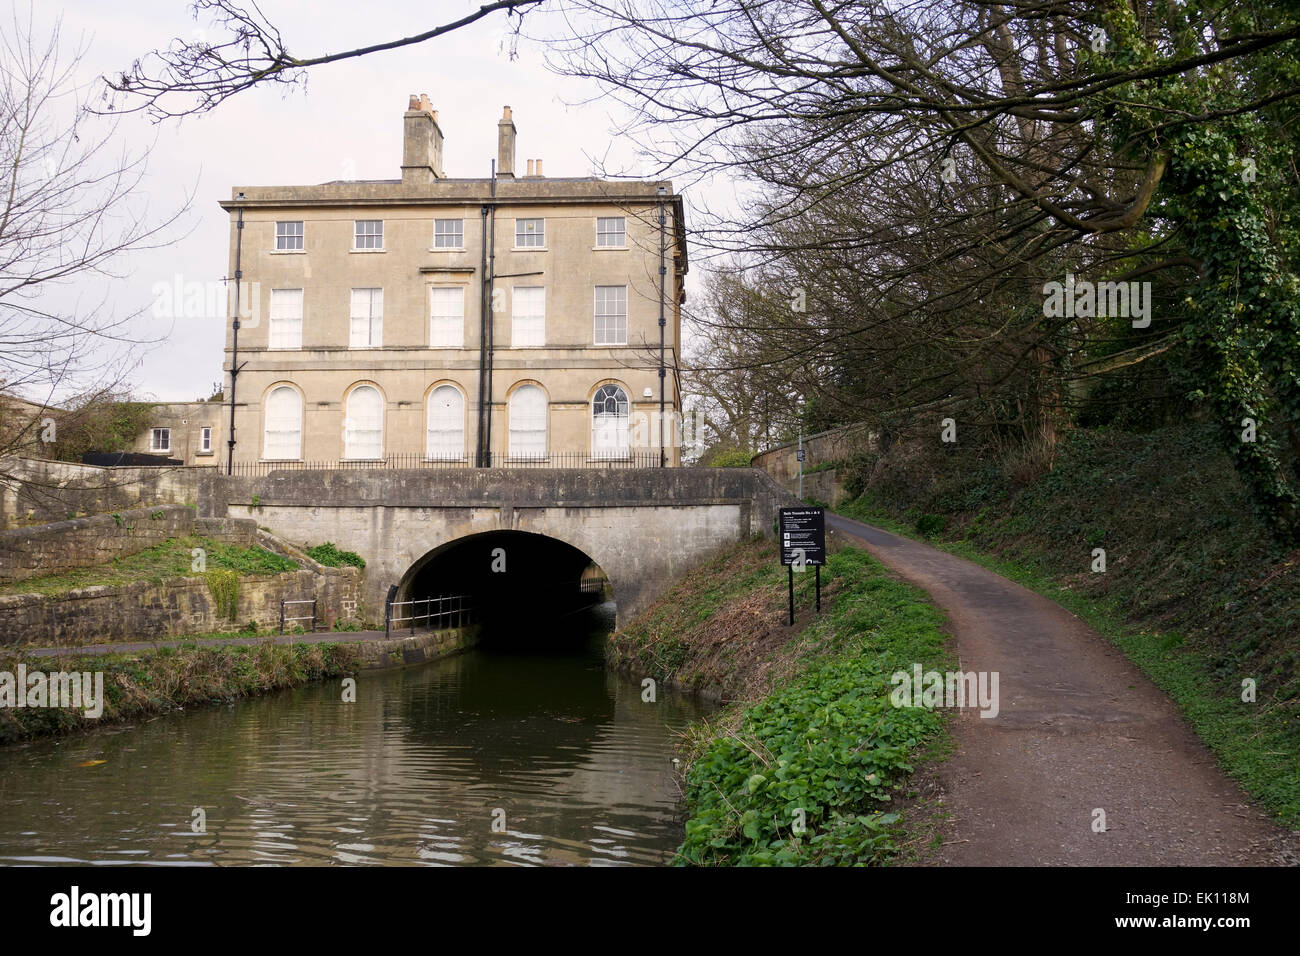 Cleveland House, The Kennet and Avon Canal, Bath. England, UK Stock Photo